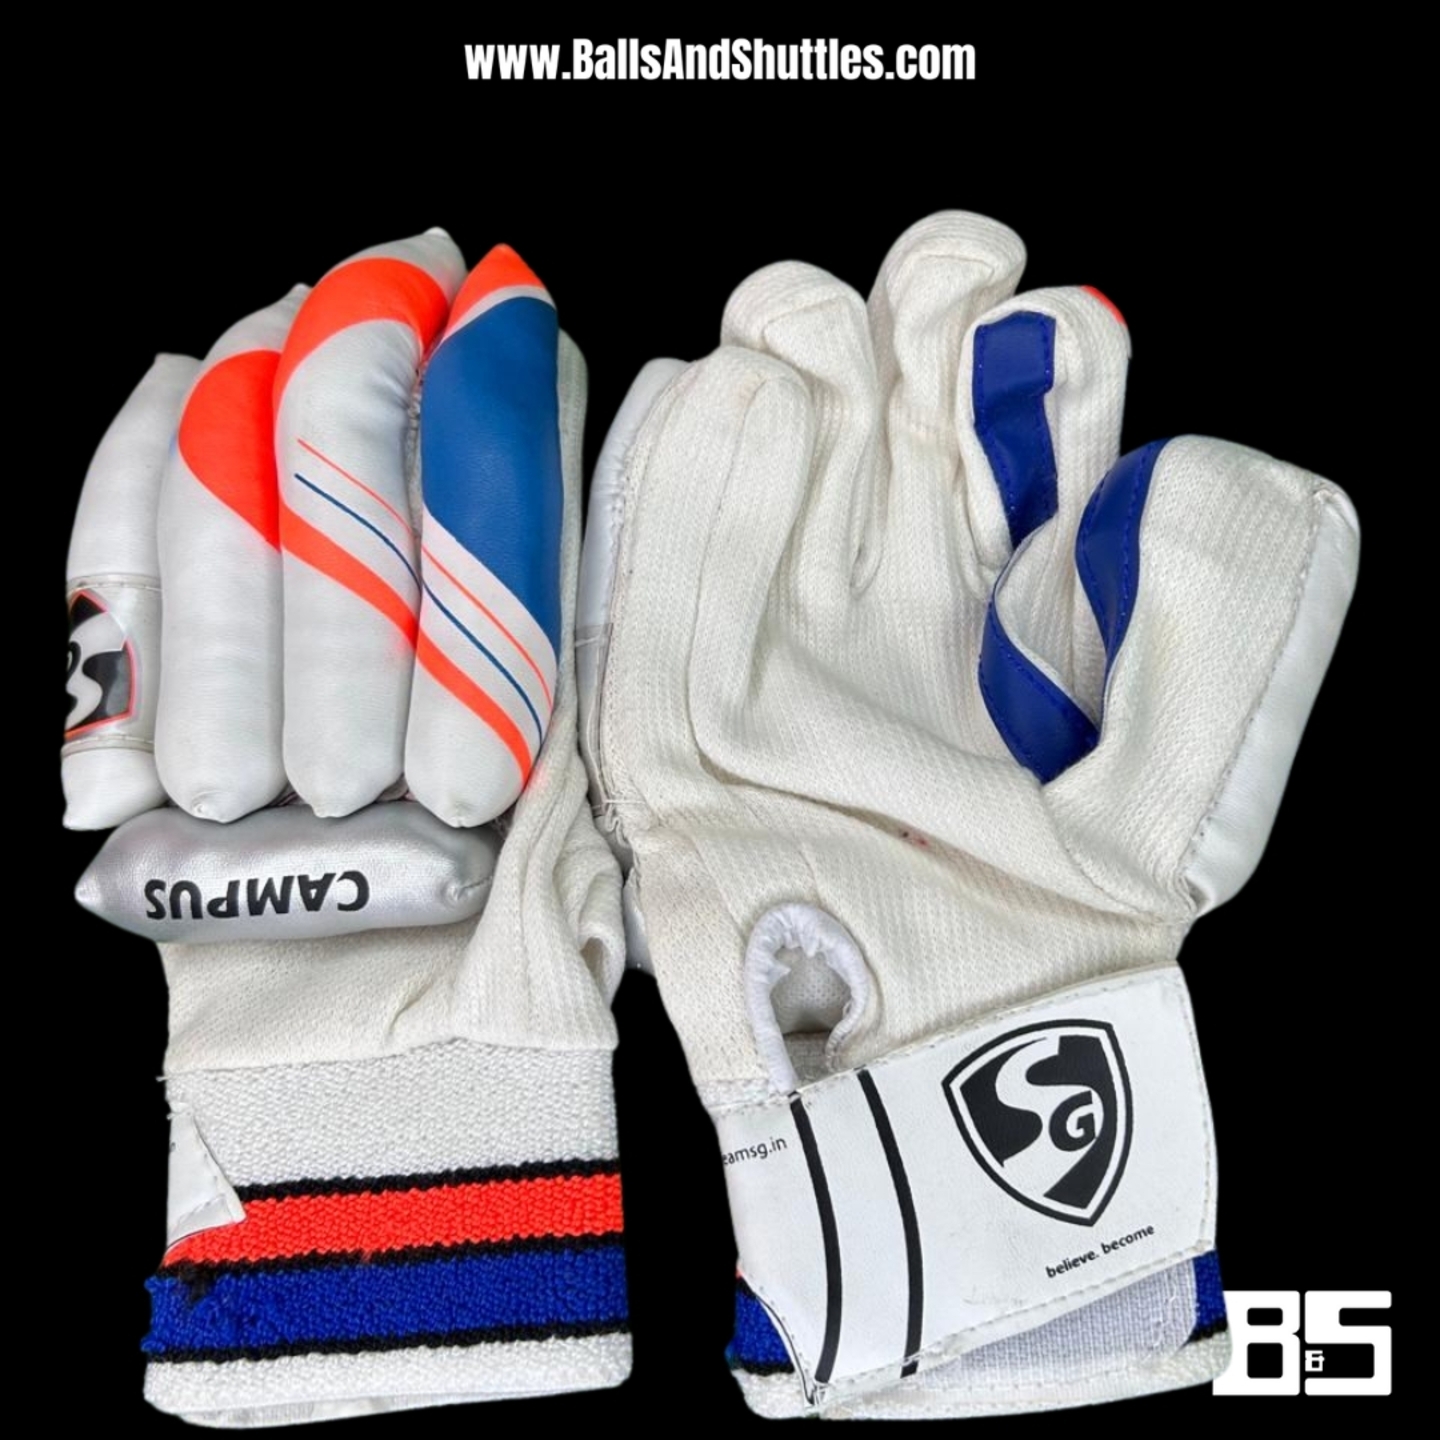 SG CAMPUS CRICKET BATTING GLOVES  YOUTH SIZE BATTING GLOVES  RH BATTING GLOVES